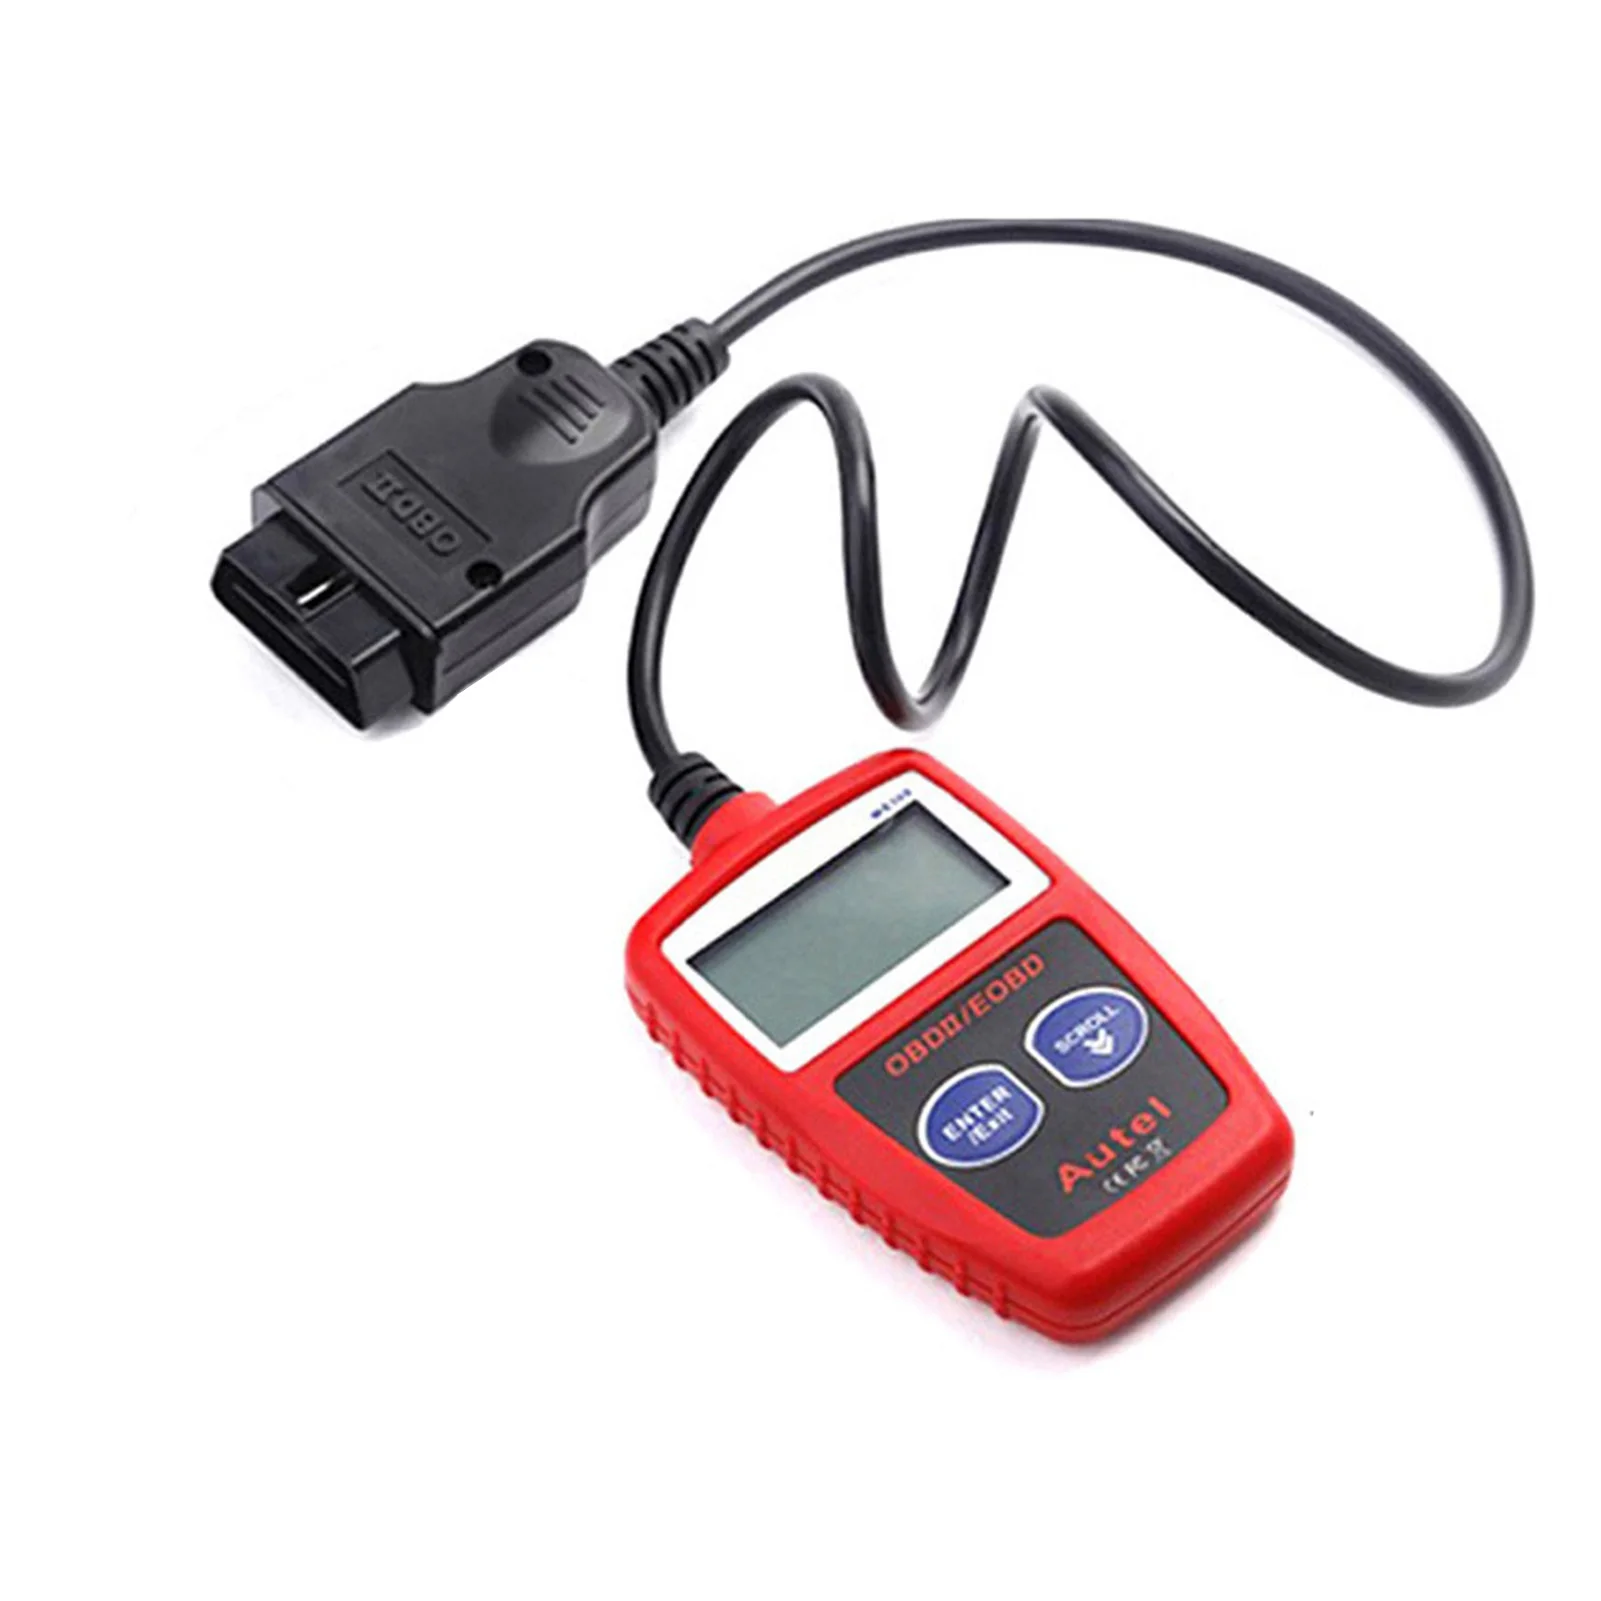 

MS309 OBD2 Scanner Car Diagnostic Scan Tools Code Reader Scanner CAN Diagnosis Scan Tool For All OBD II Protocol Cars Since 1996